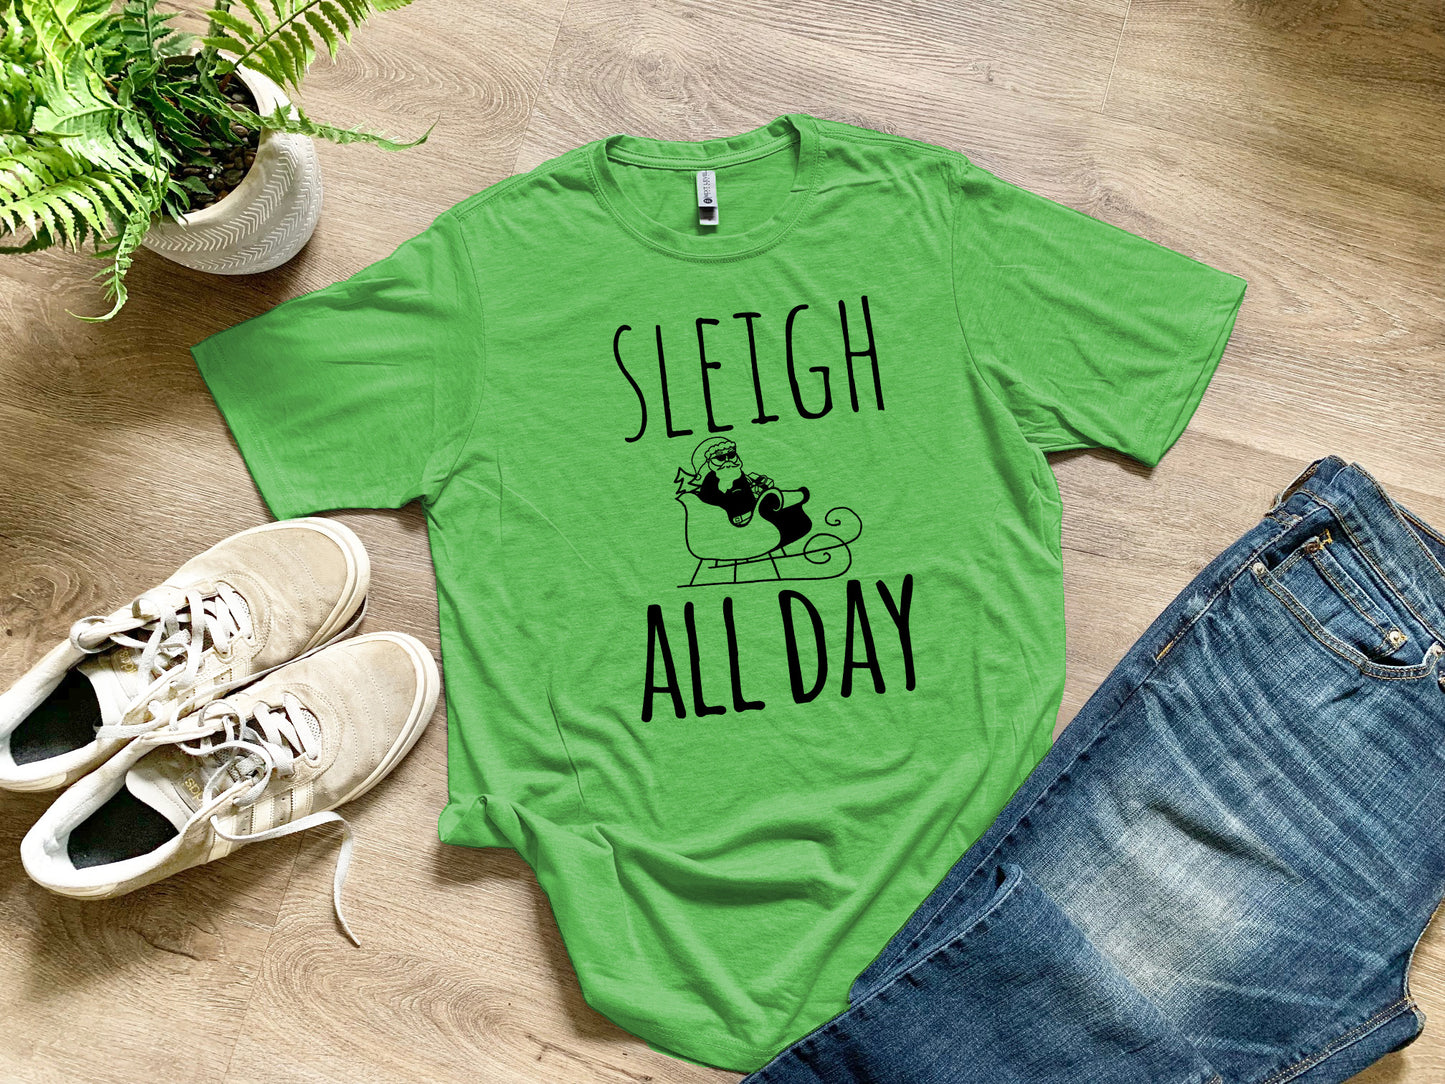 Sleigh All Day - Christmas Tee - Men's / Unisex Tee - Envy or Red